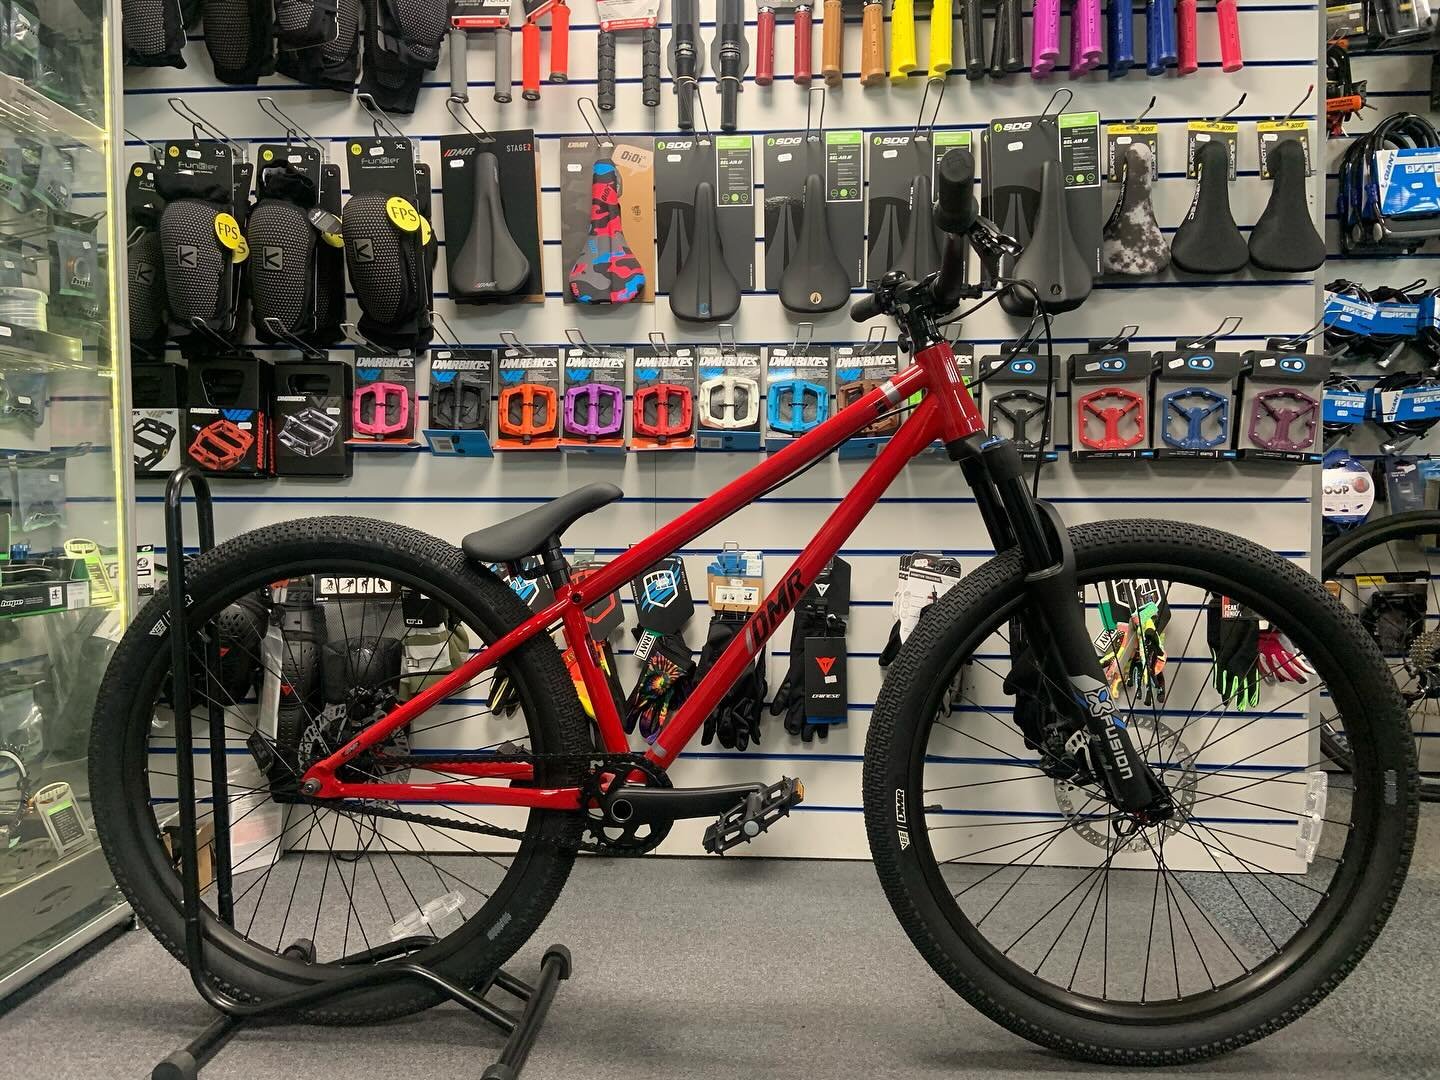 We had a @dmrbikes sect pro #dirtjumper #dirtjump bike leave us at the weekend. These offer great value at &pound;1300 with a #4130cromoly frame and @xfusionshox fork, the perfect starter dirt jump bike. #localbikeshop #shoplocal #miltonkeynesbusines